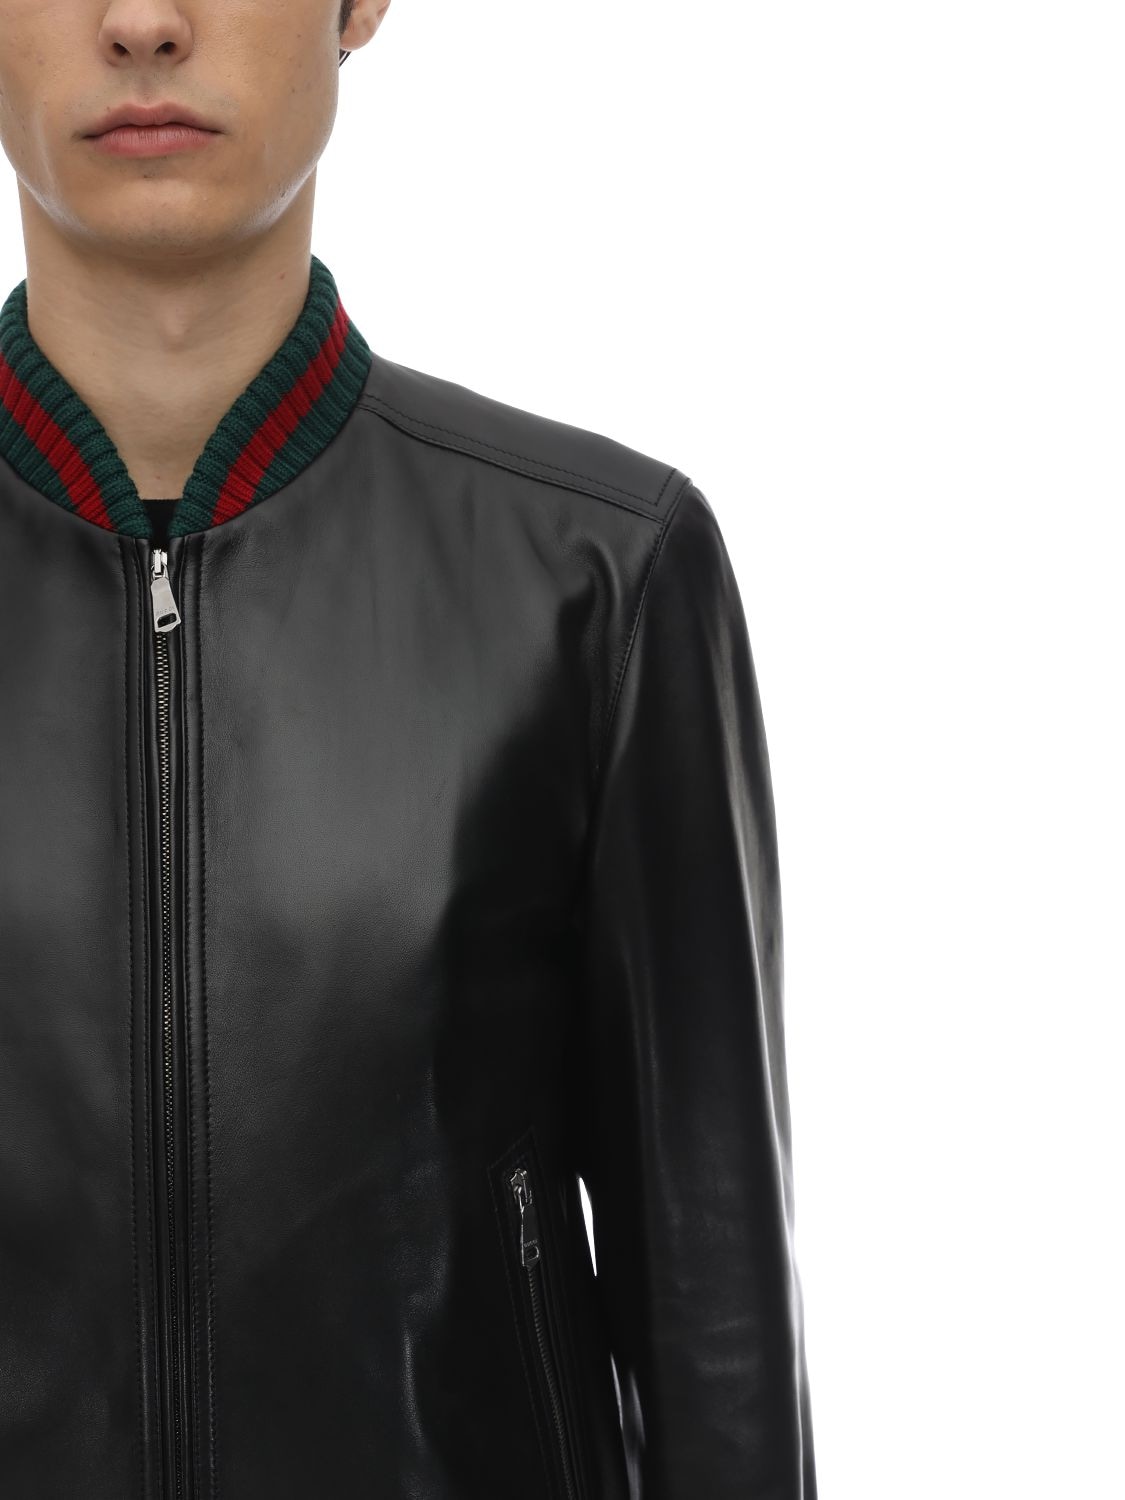 Gucci Jacket Lambskin Bomber Jacket with Virgin Wool Finishes and Web Detail Black